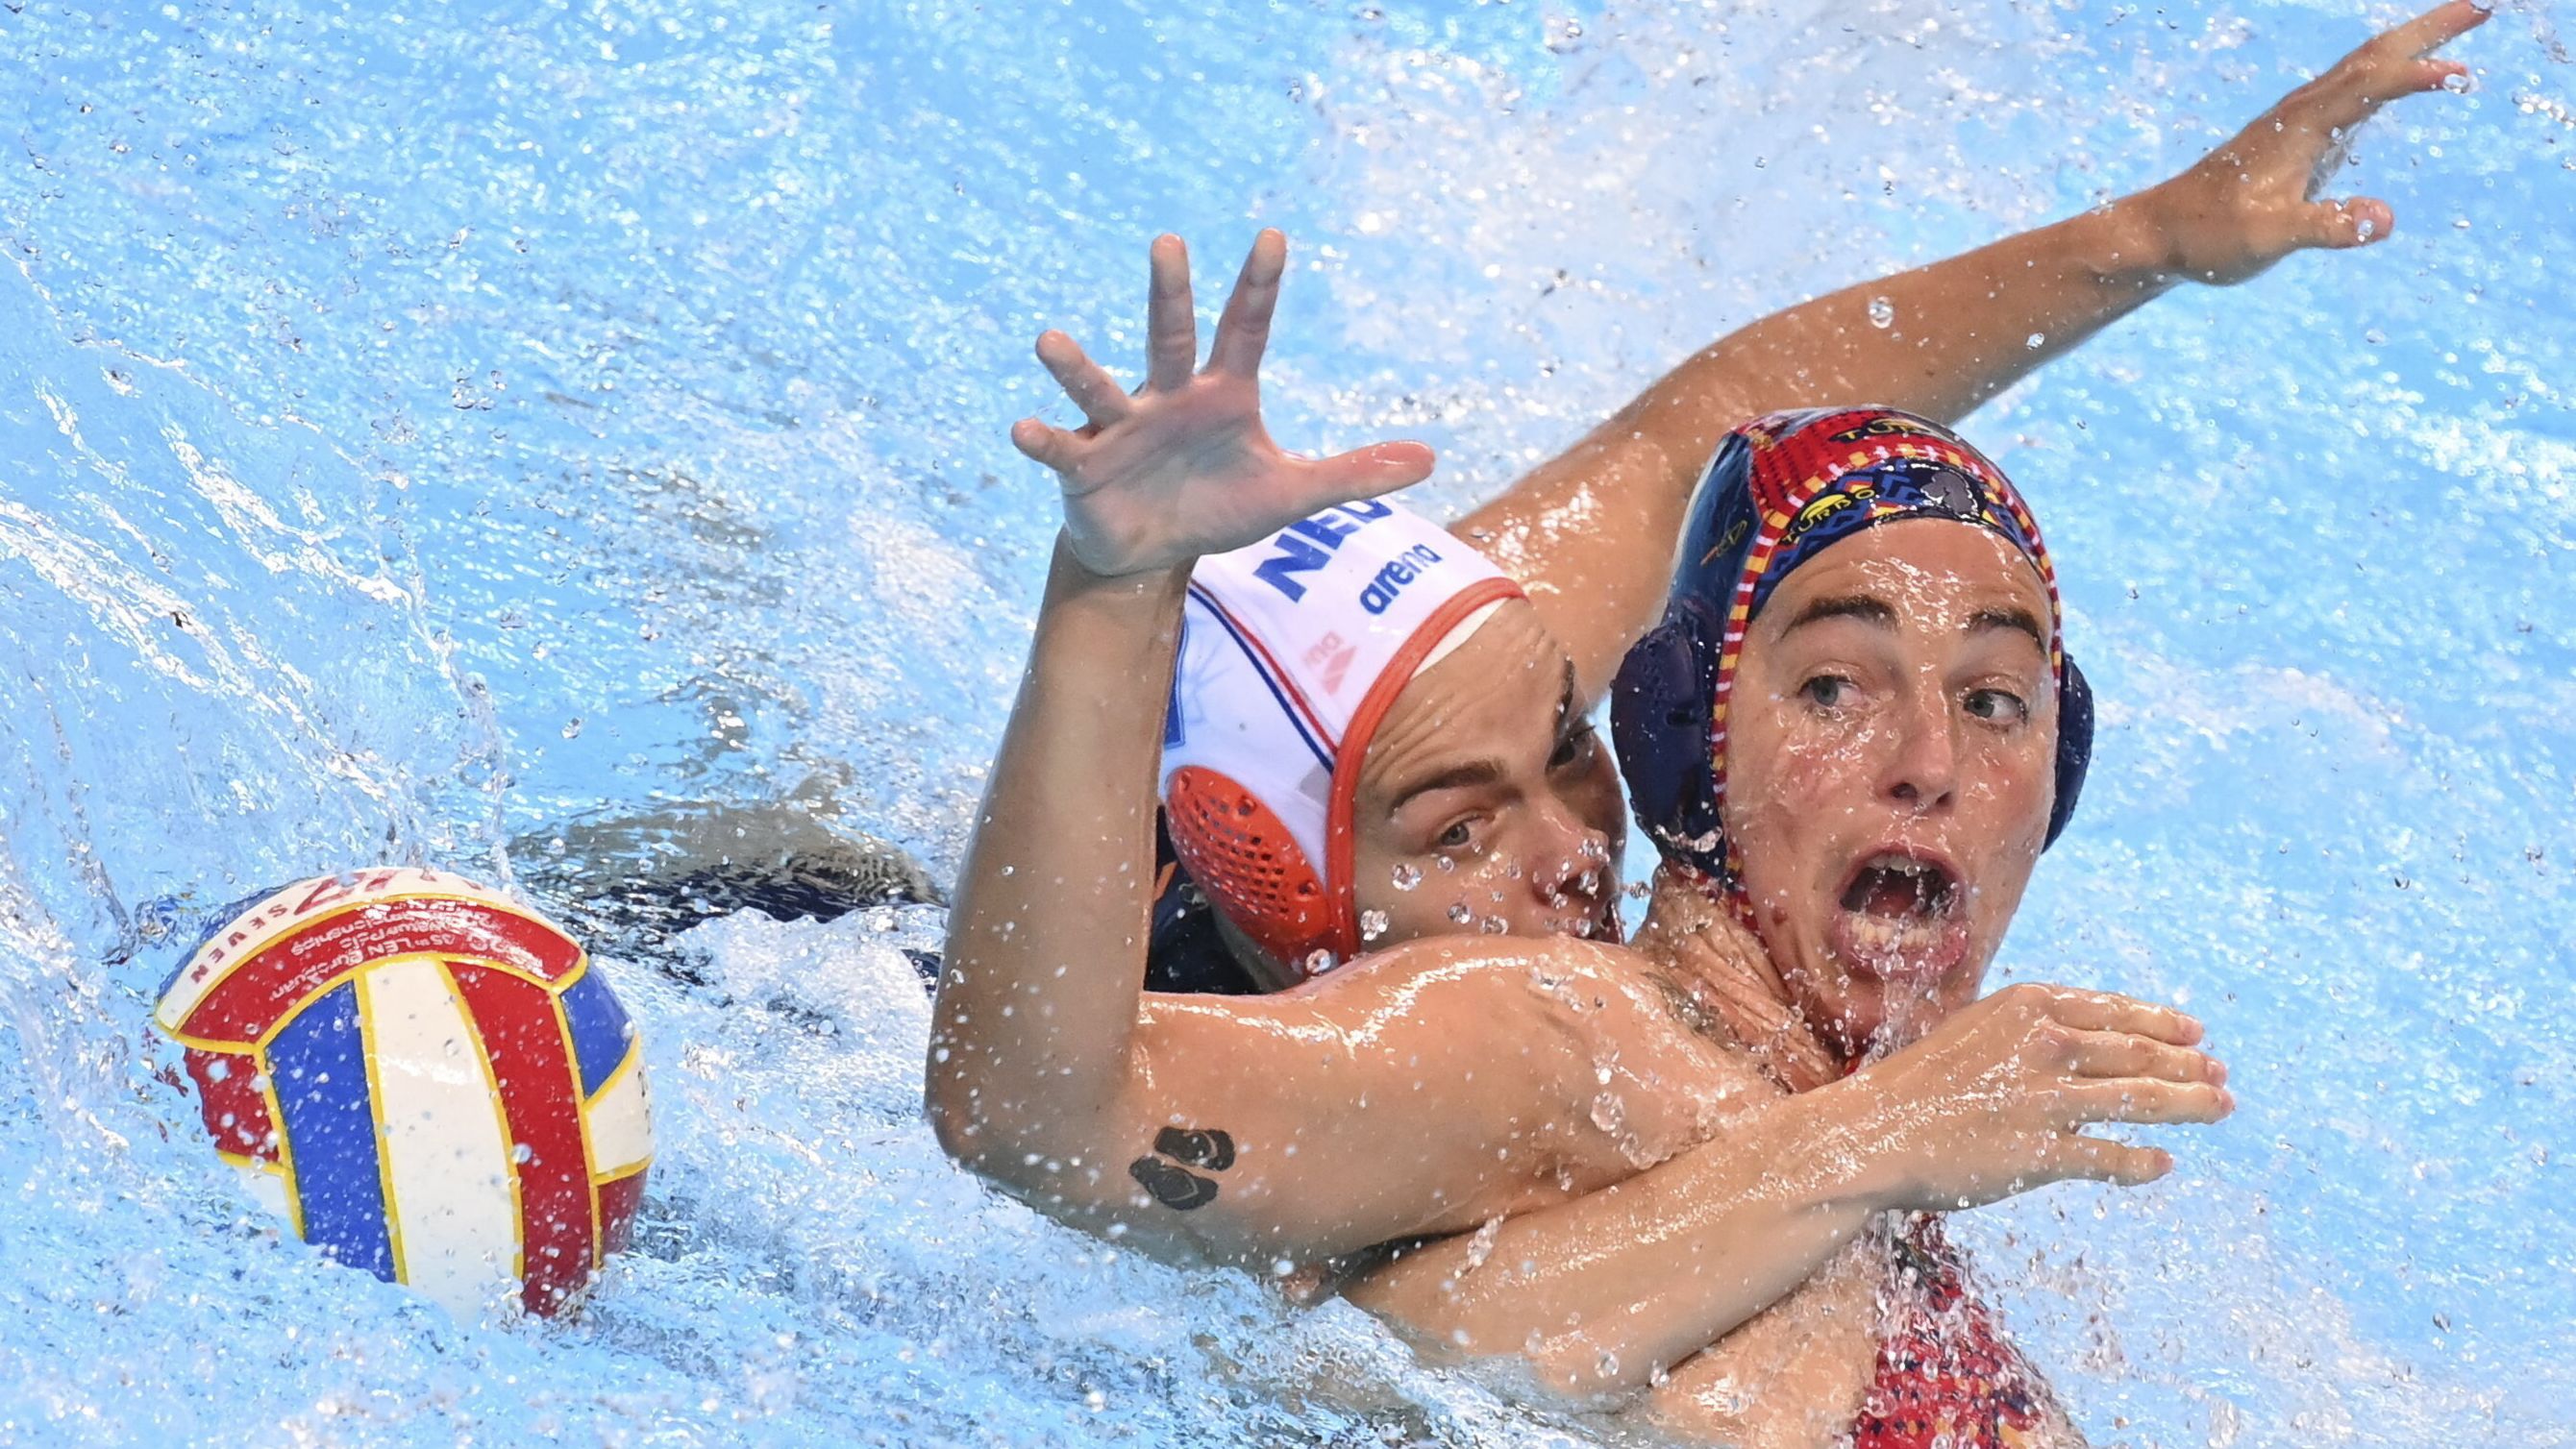 Dutch water polo player Bente Rogge, left, competes against Spain's Maica Garcia Godoy during a semifinal match at the European Water Polo Championships on Wednesday, September 7.